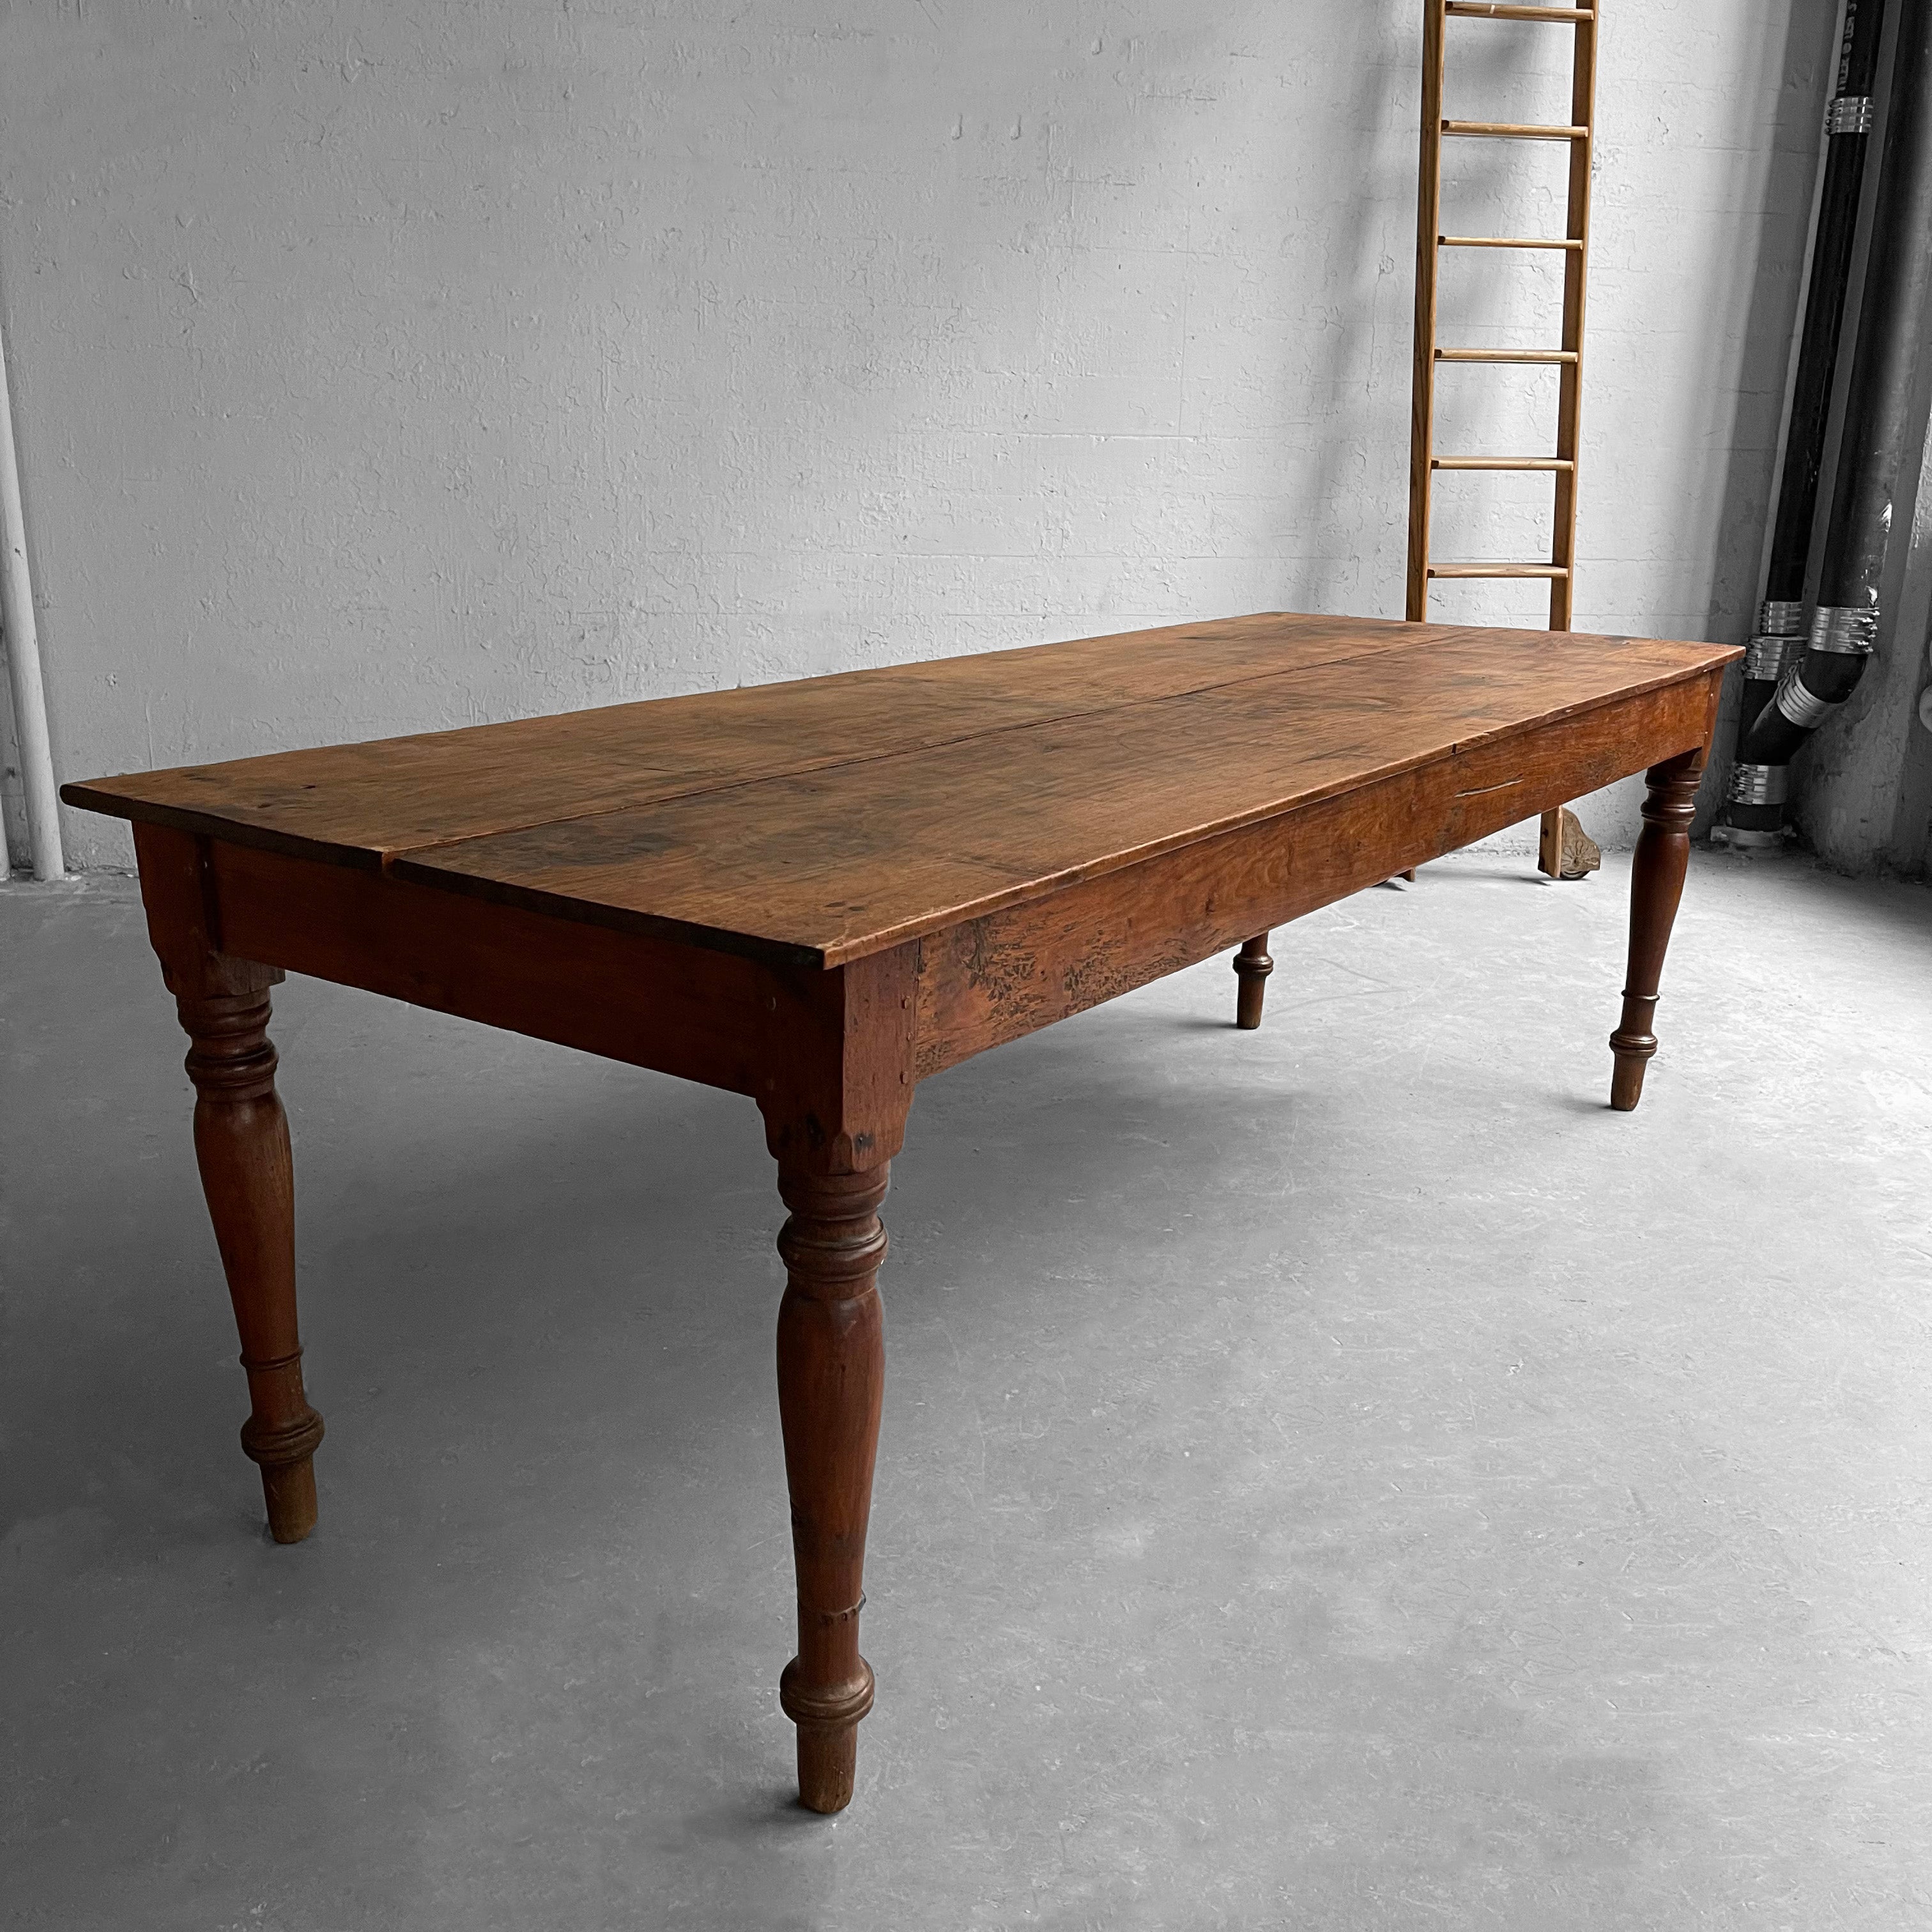 Antique, English walnut, farm table features turned legs with wide plank top. The table is sturdy and weathered beautifully for a stately rustic look. Height to the lip is 24 inches. The table works wonderfully as a desk, dining or work table.